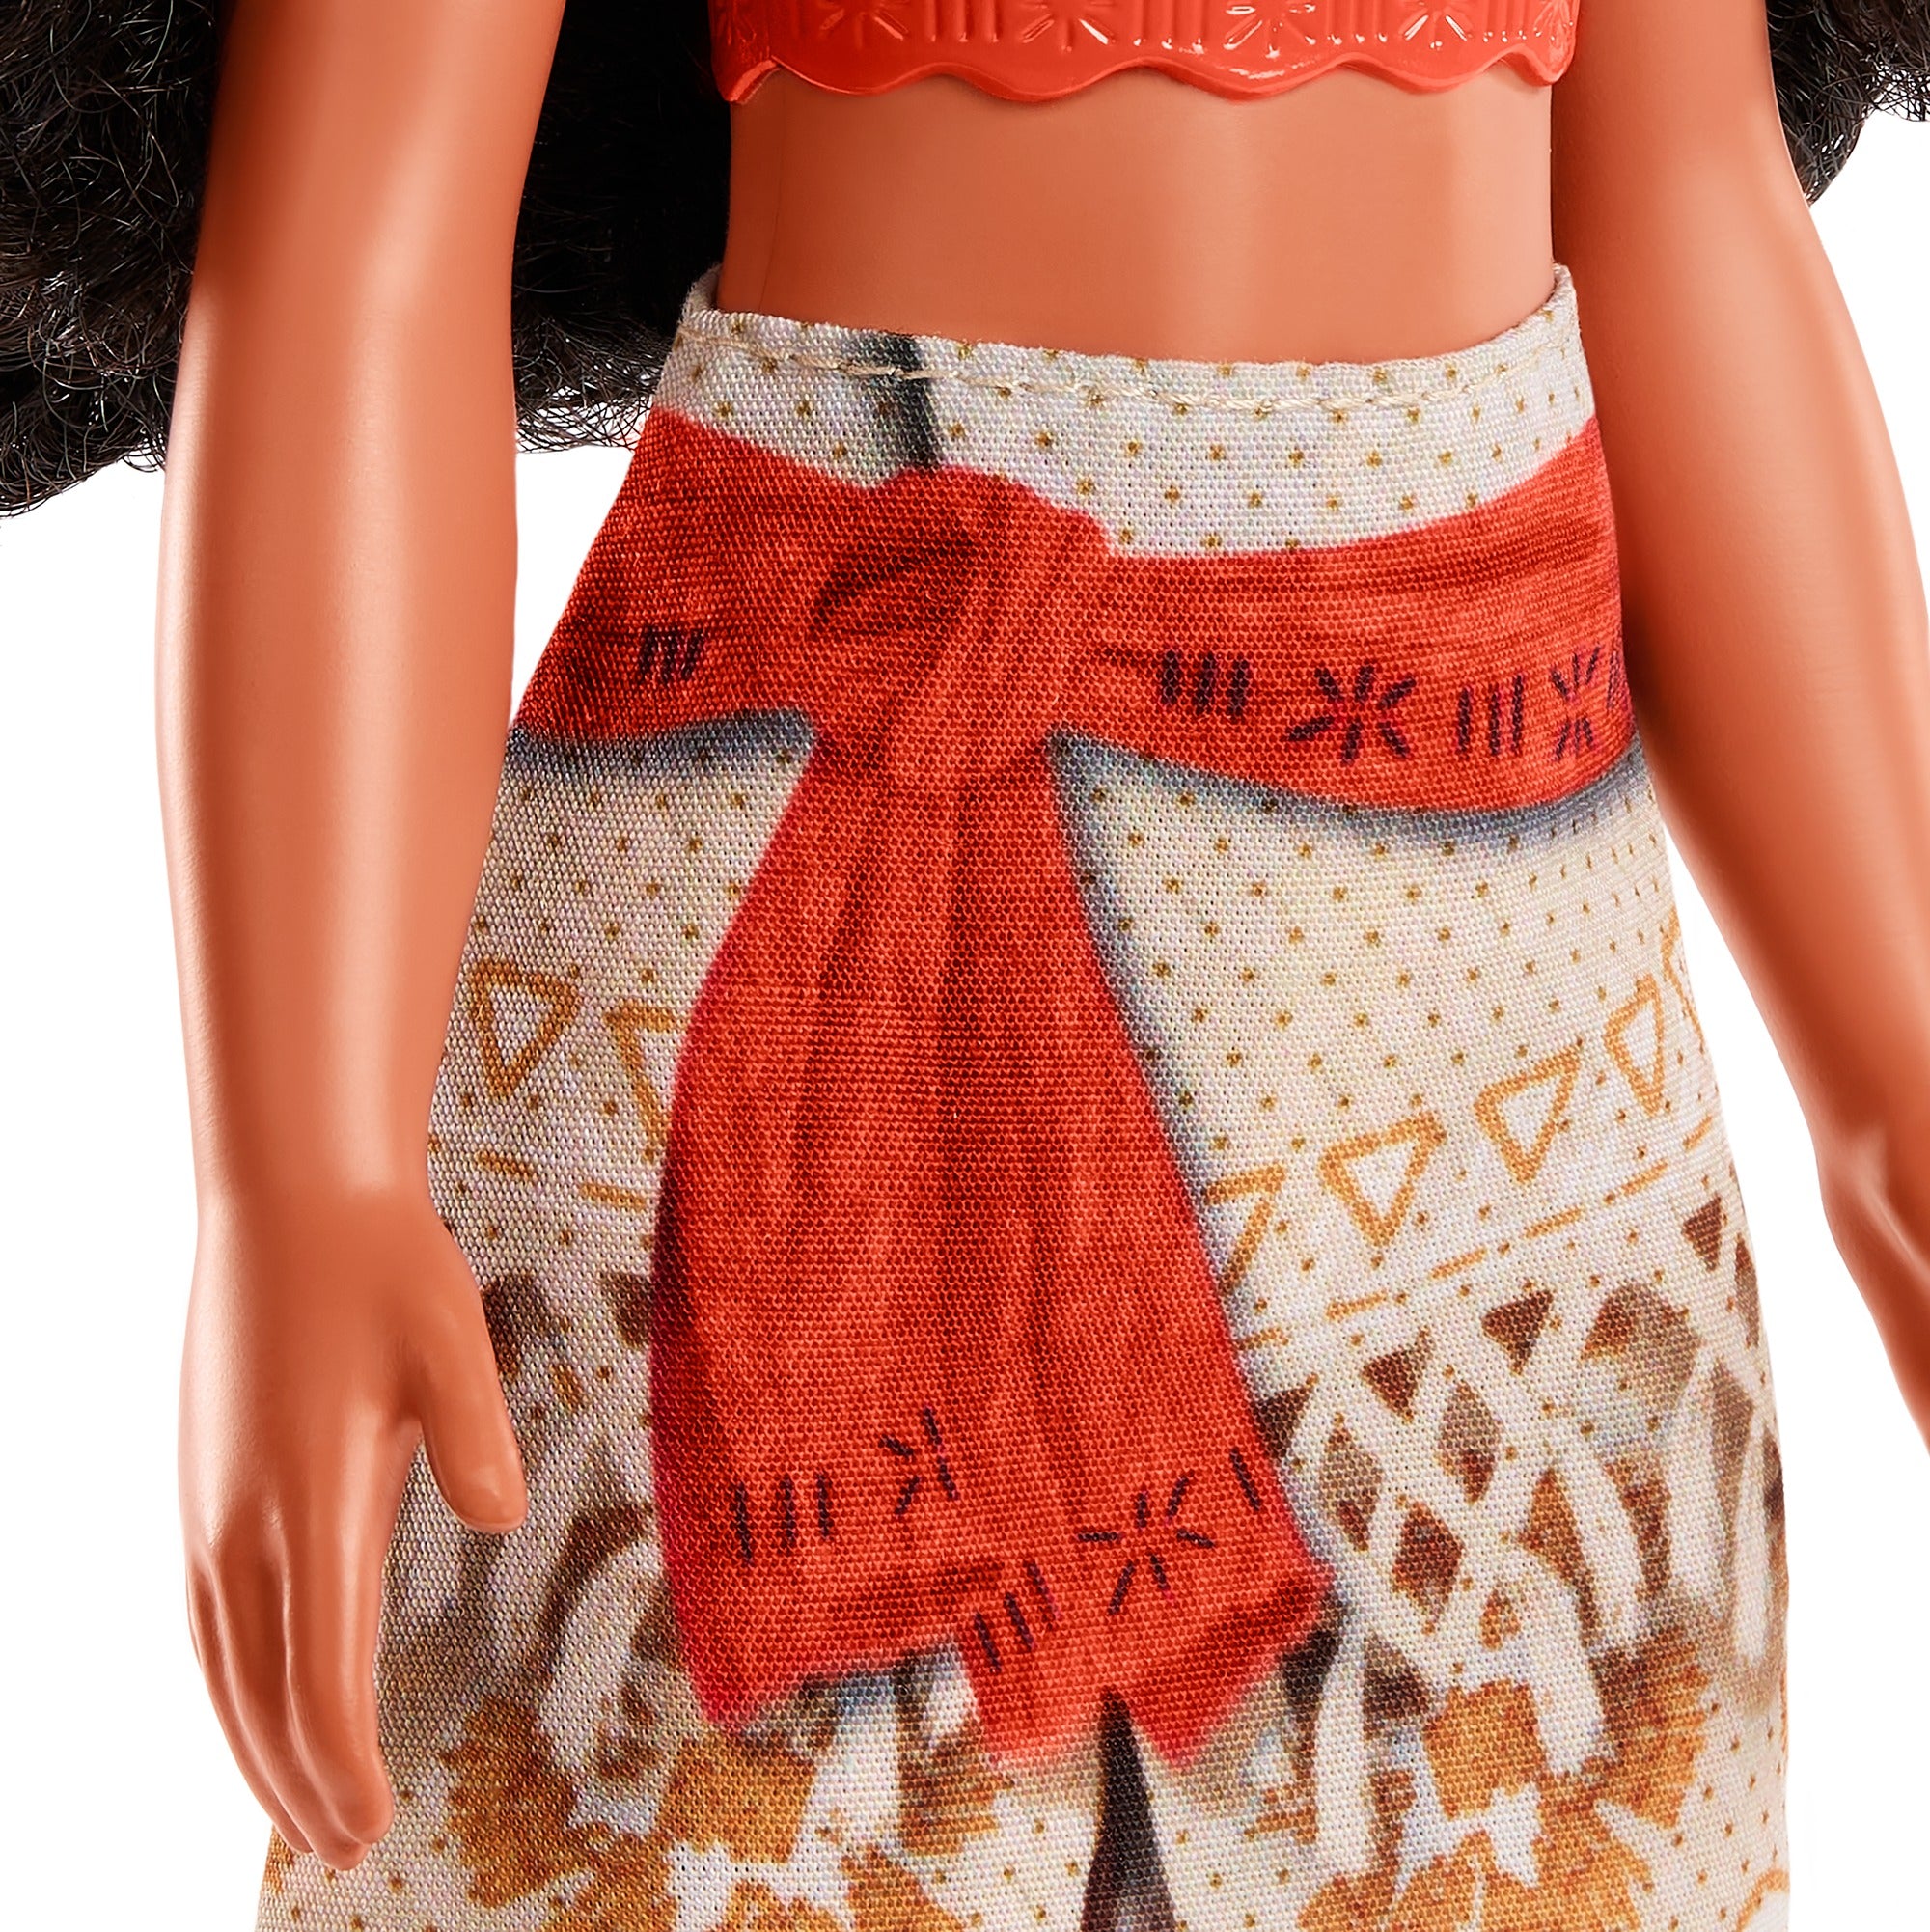 Disney Princess Posable Moana Fashion Doll with Clothing and Accessories Inspired by the Disney Movie for Kids Ages 3+